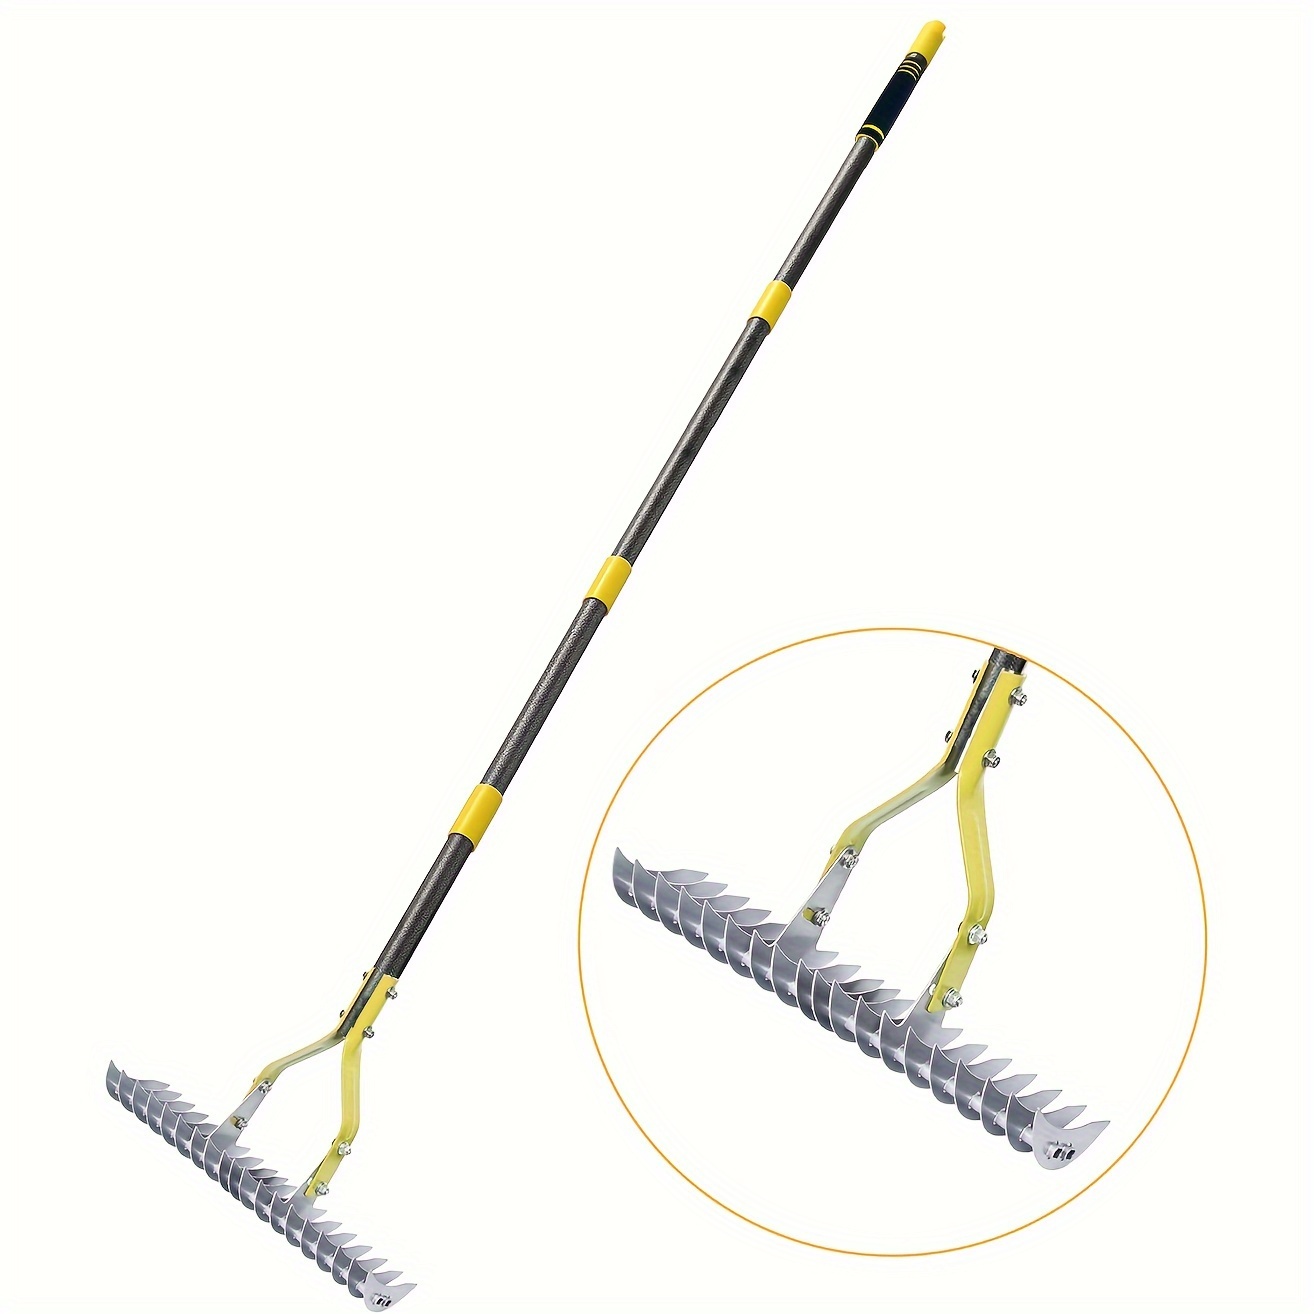 

Efficient 15-inch Wide Thatch Rake With Stainless Steel Handle - Durable Metal Lawn Grass Cleaner, Soil Loosening Tool, 70-inch Length